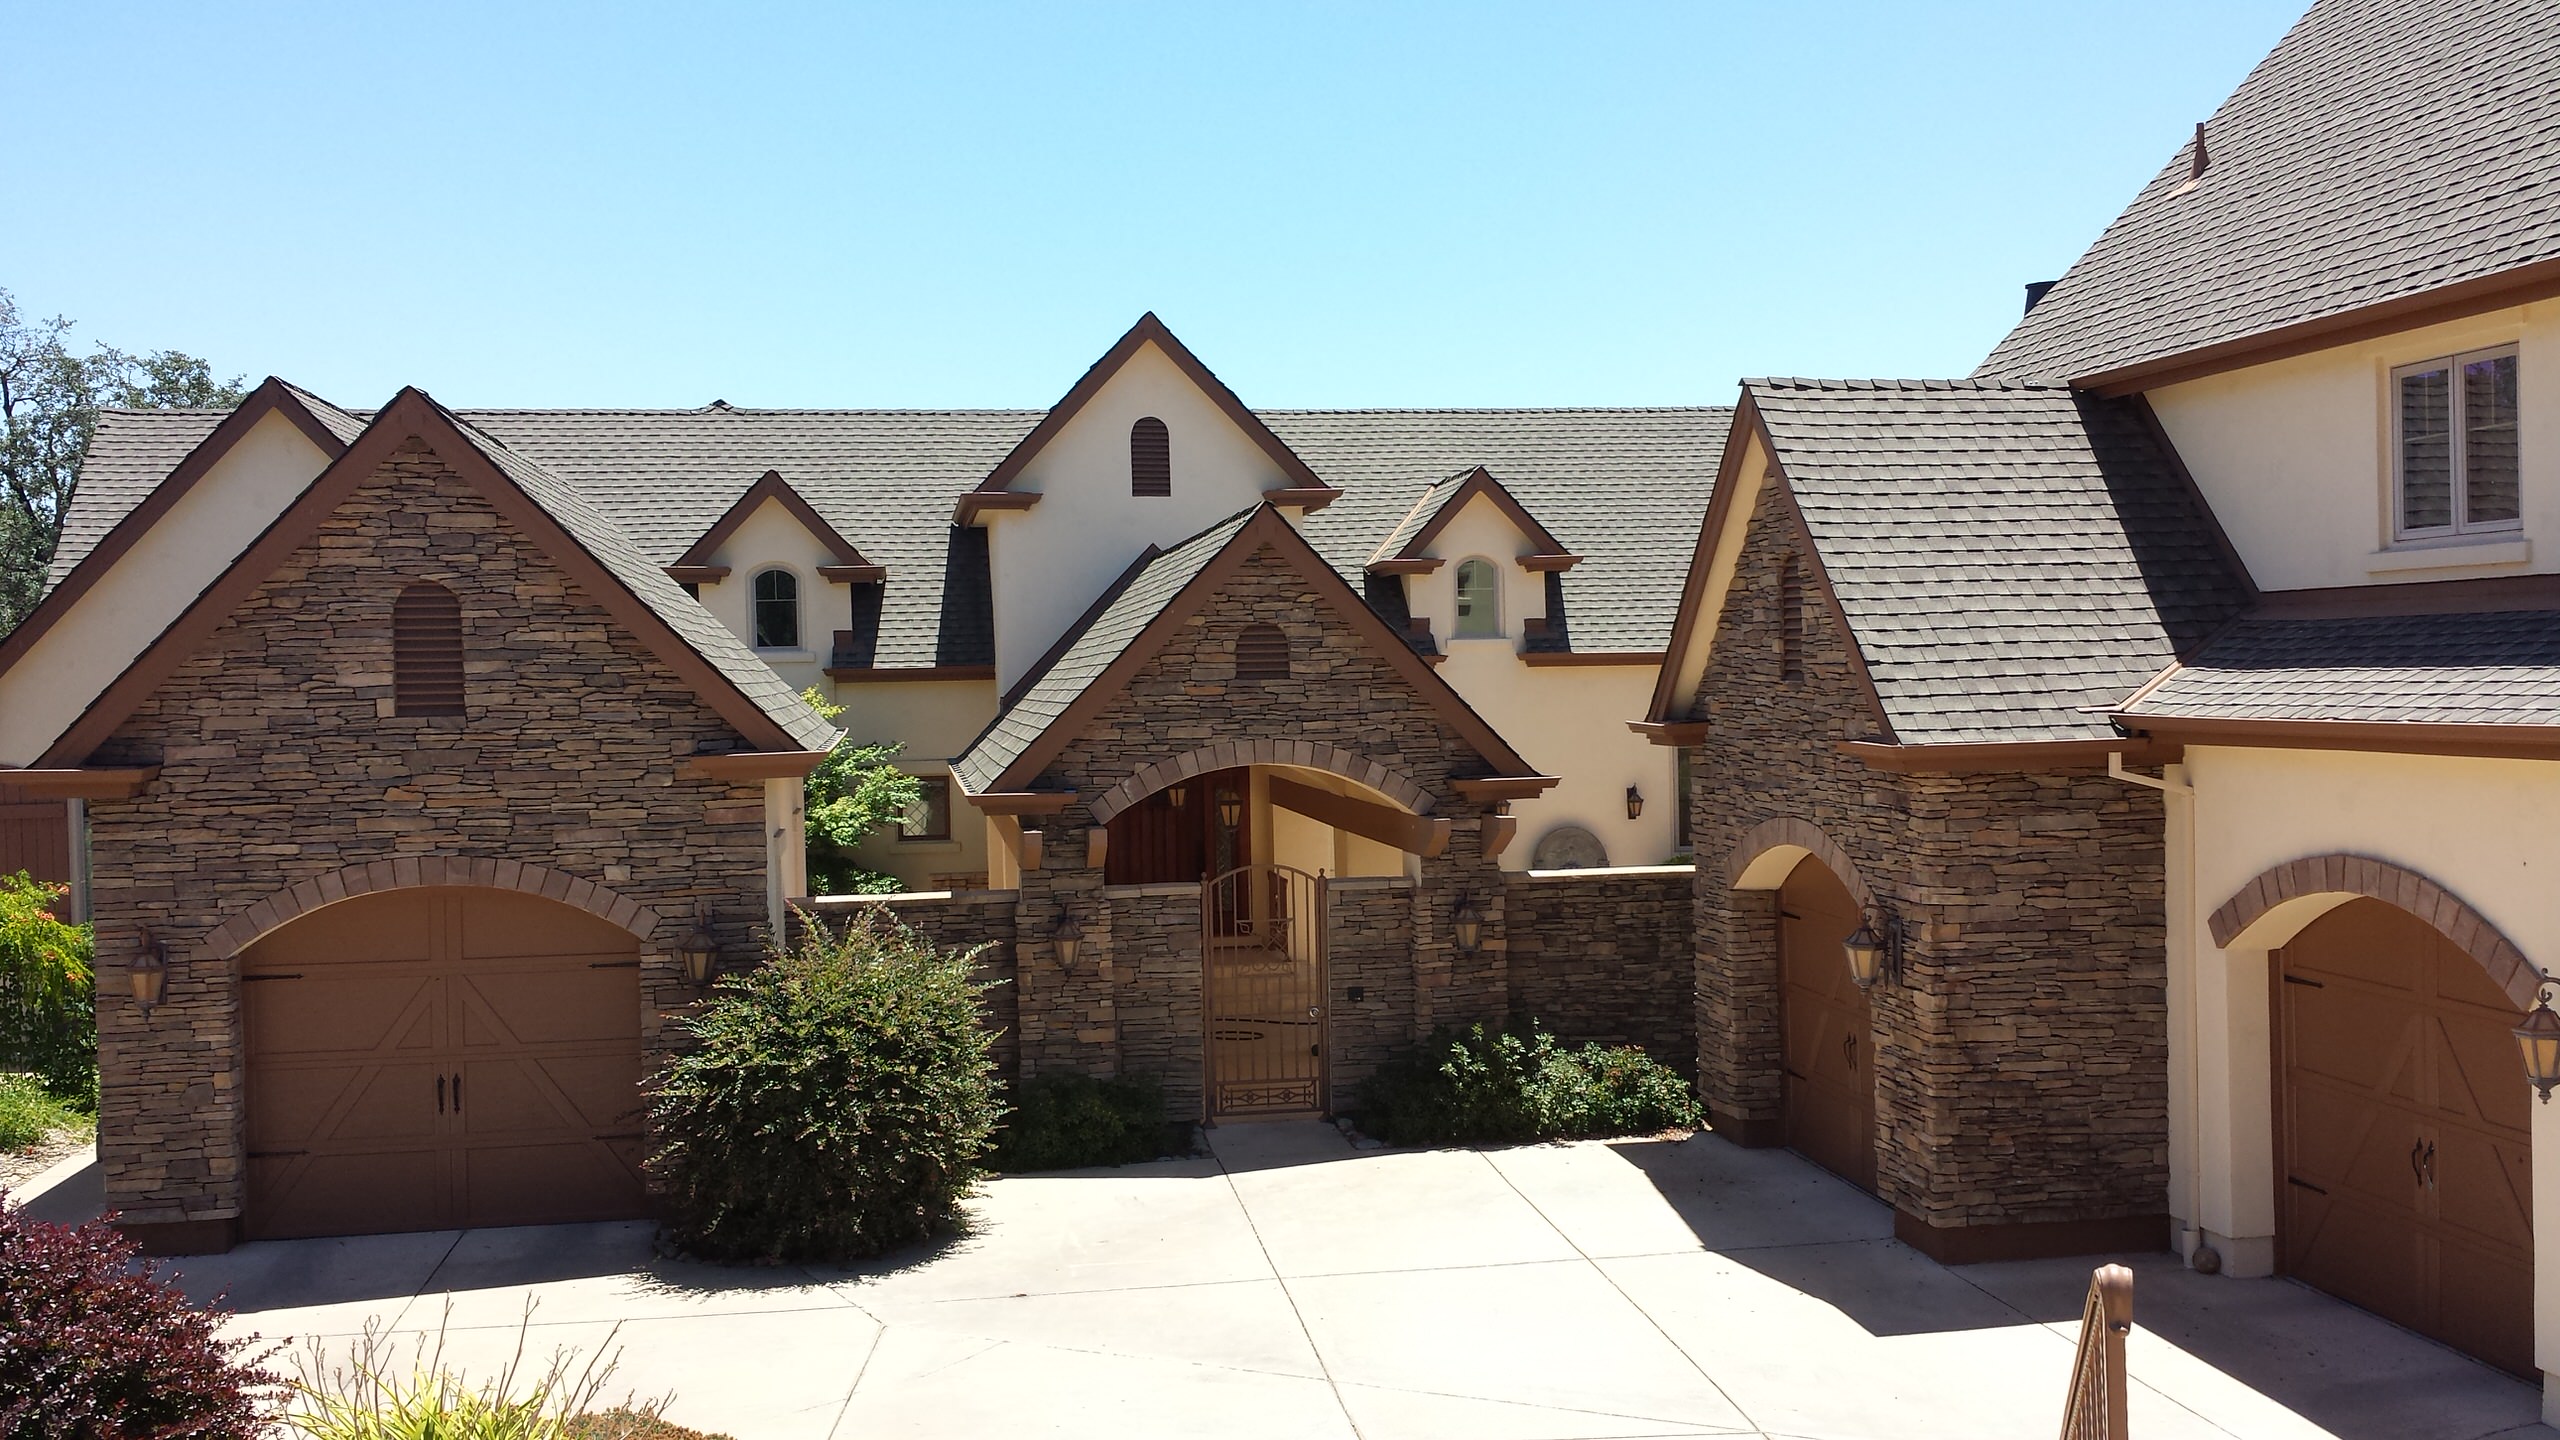 Traditional - More Saddle Creek Houses by Impluvium